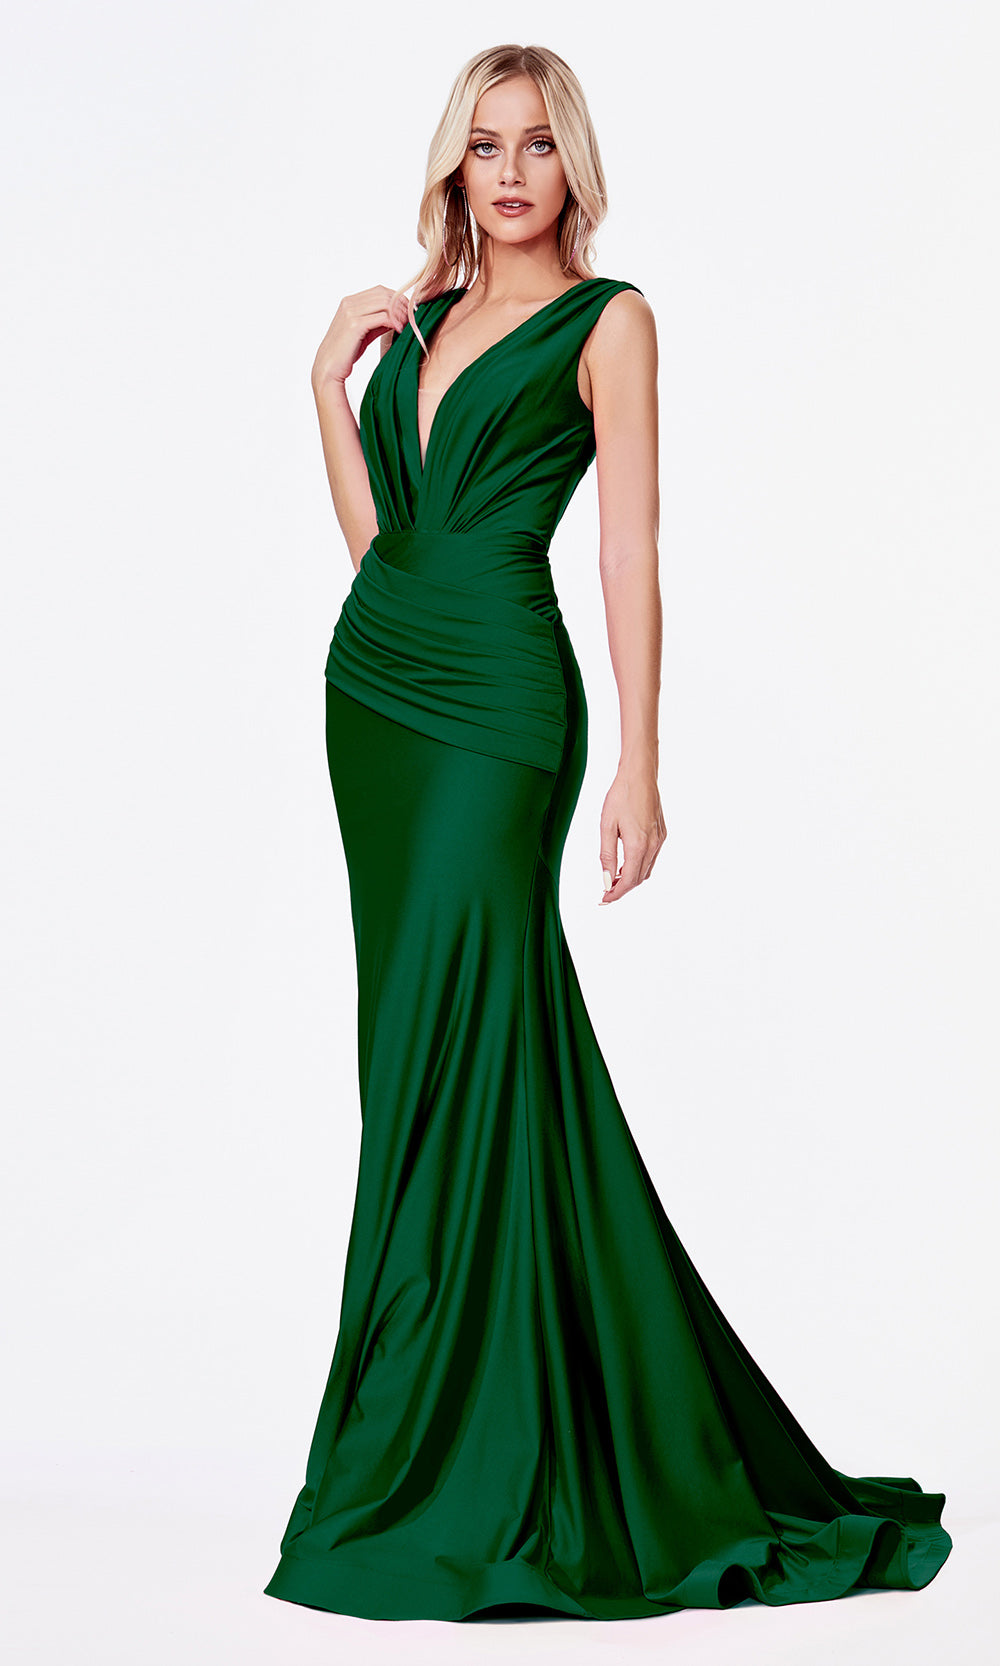 Cinderella Divine CD912 dark green v neck fitted dress w/wide straps. Perfect hunter green dress for prom, engagement shoot, bridesmaids, indowestern gown, black tie event, gala, pageant, formal party dress, wedding guest dress. Plus sizes avail.jpg